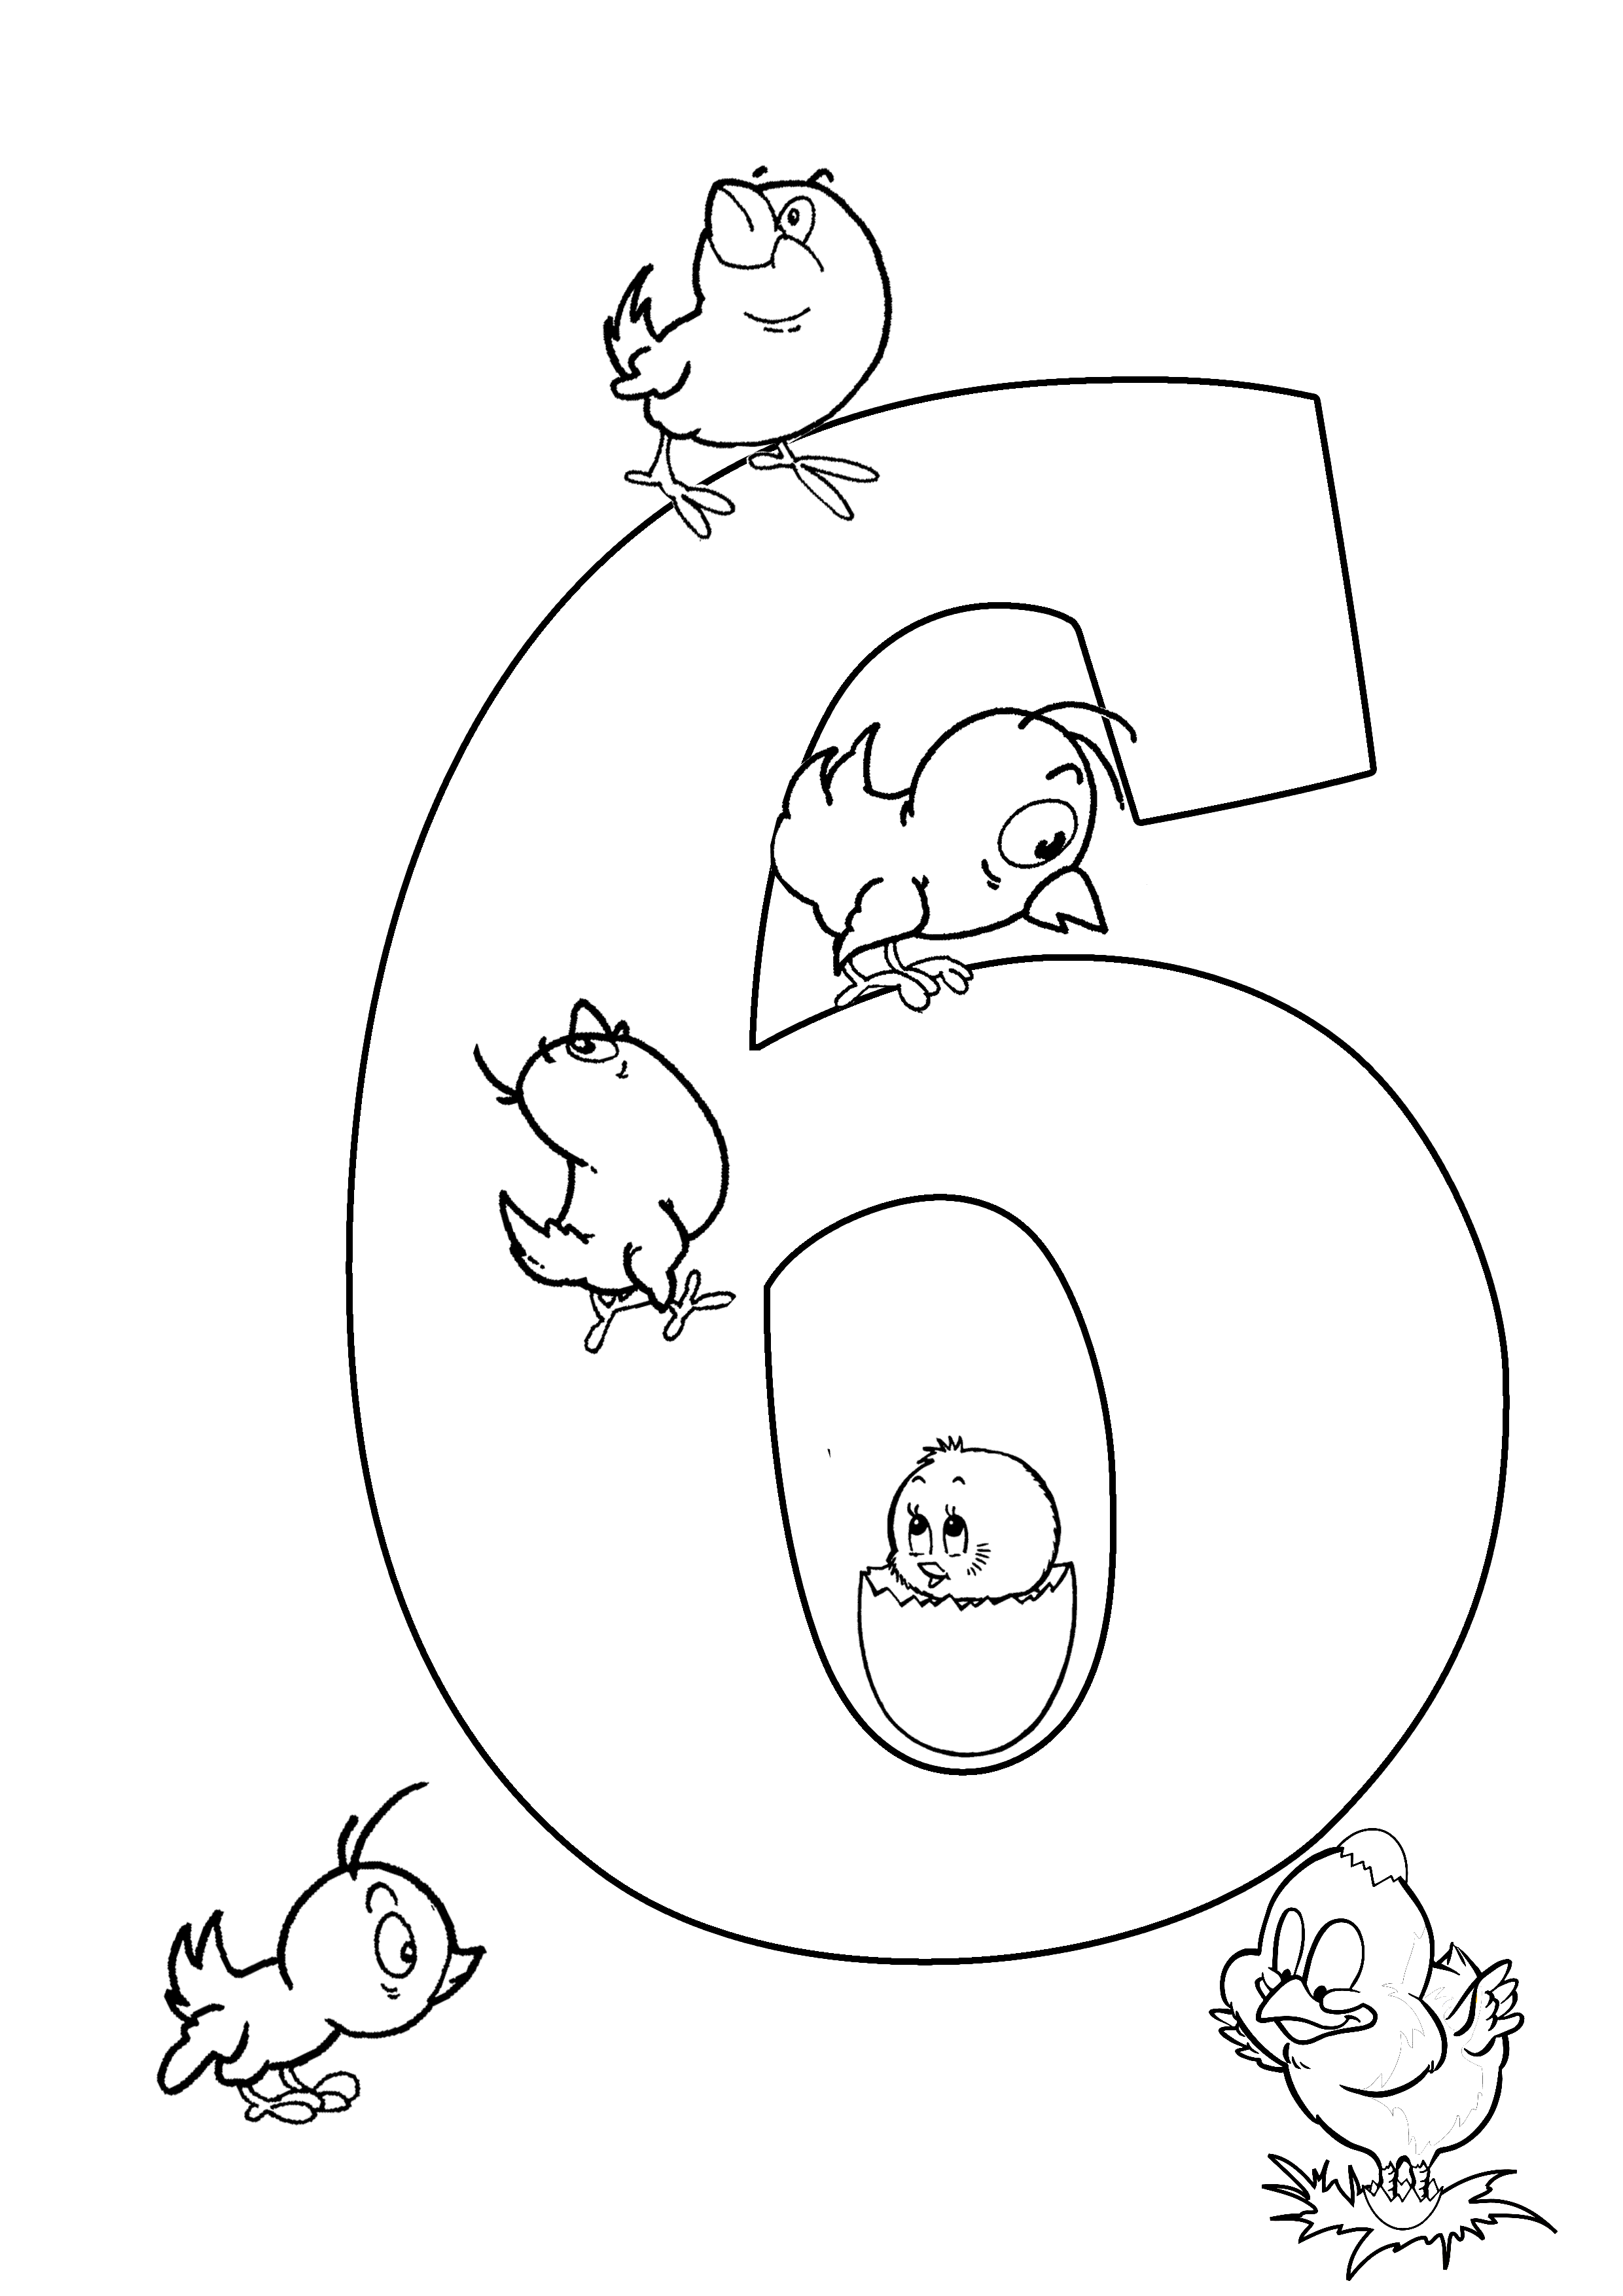 Number Coloring Pages For Kids Coloring Pages